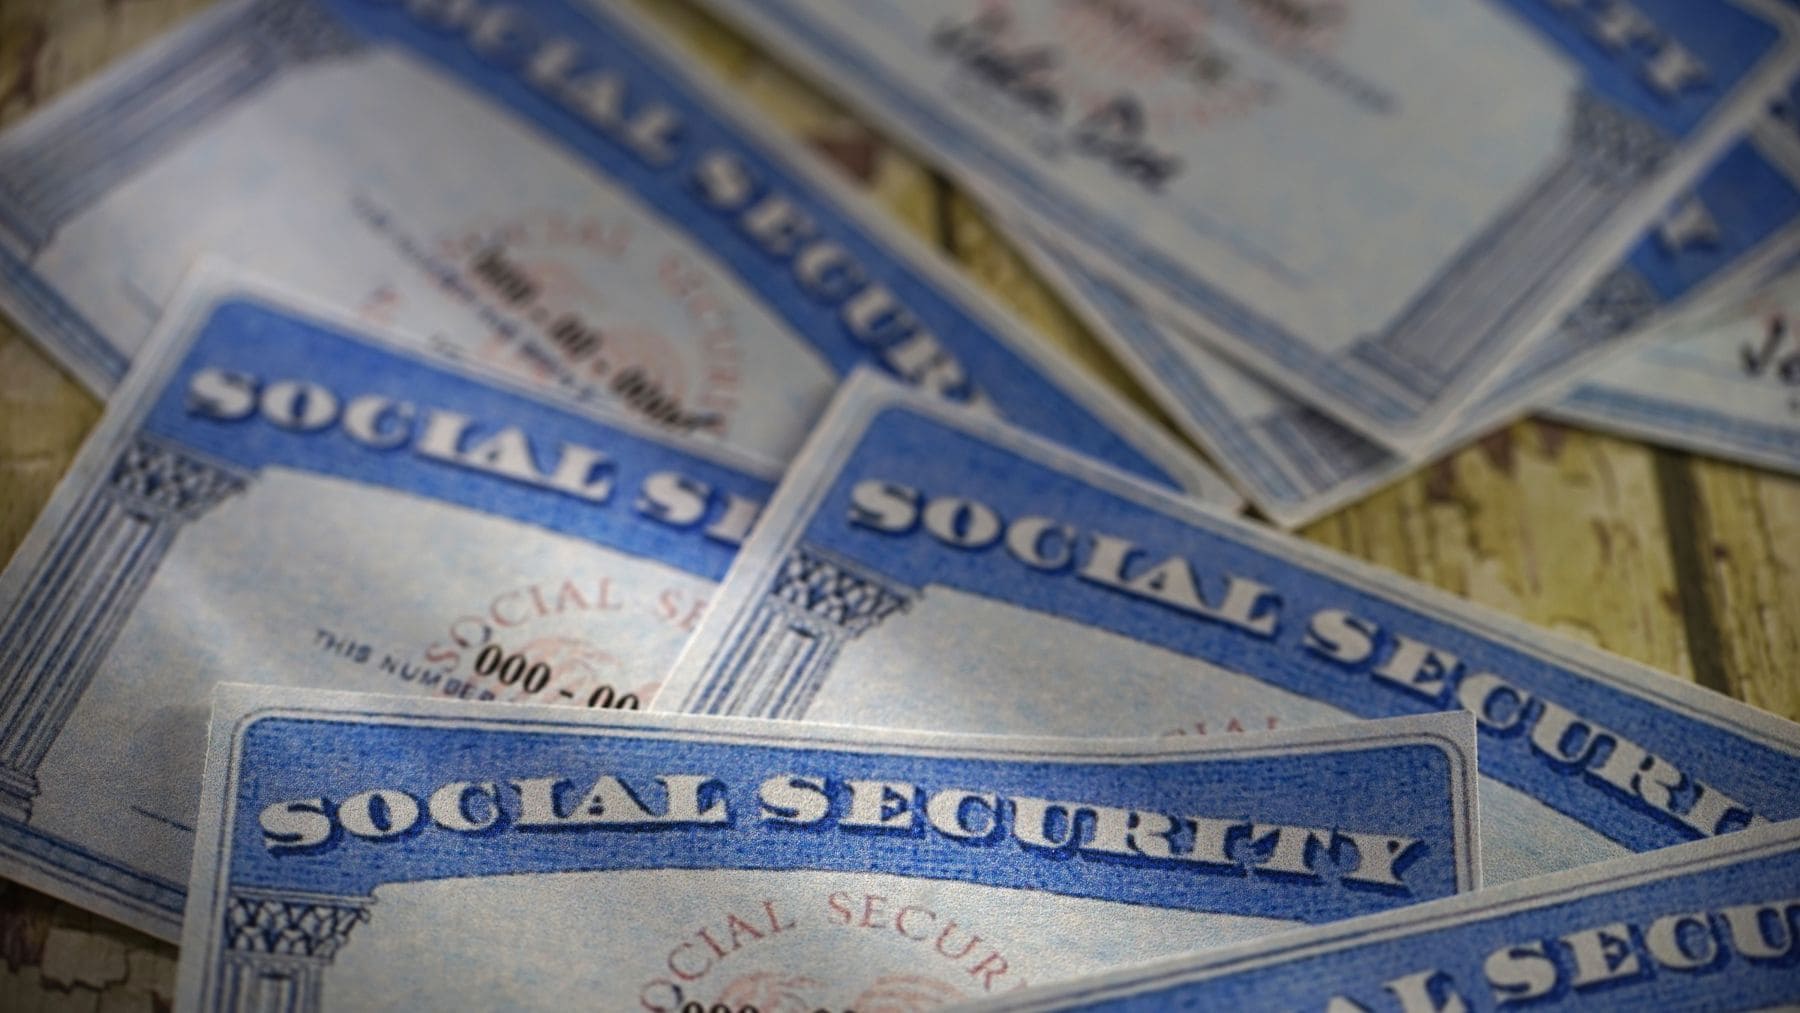 Some Social Security cards